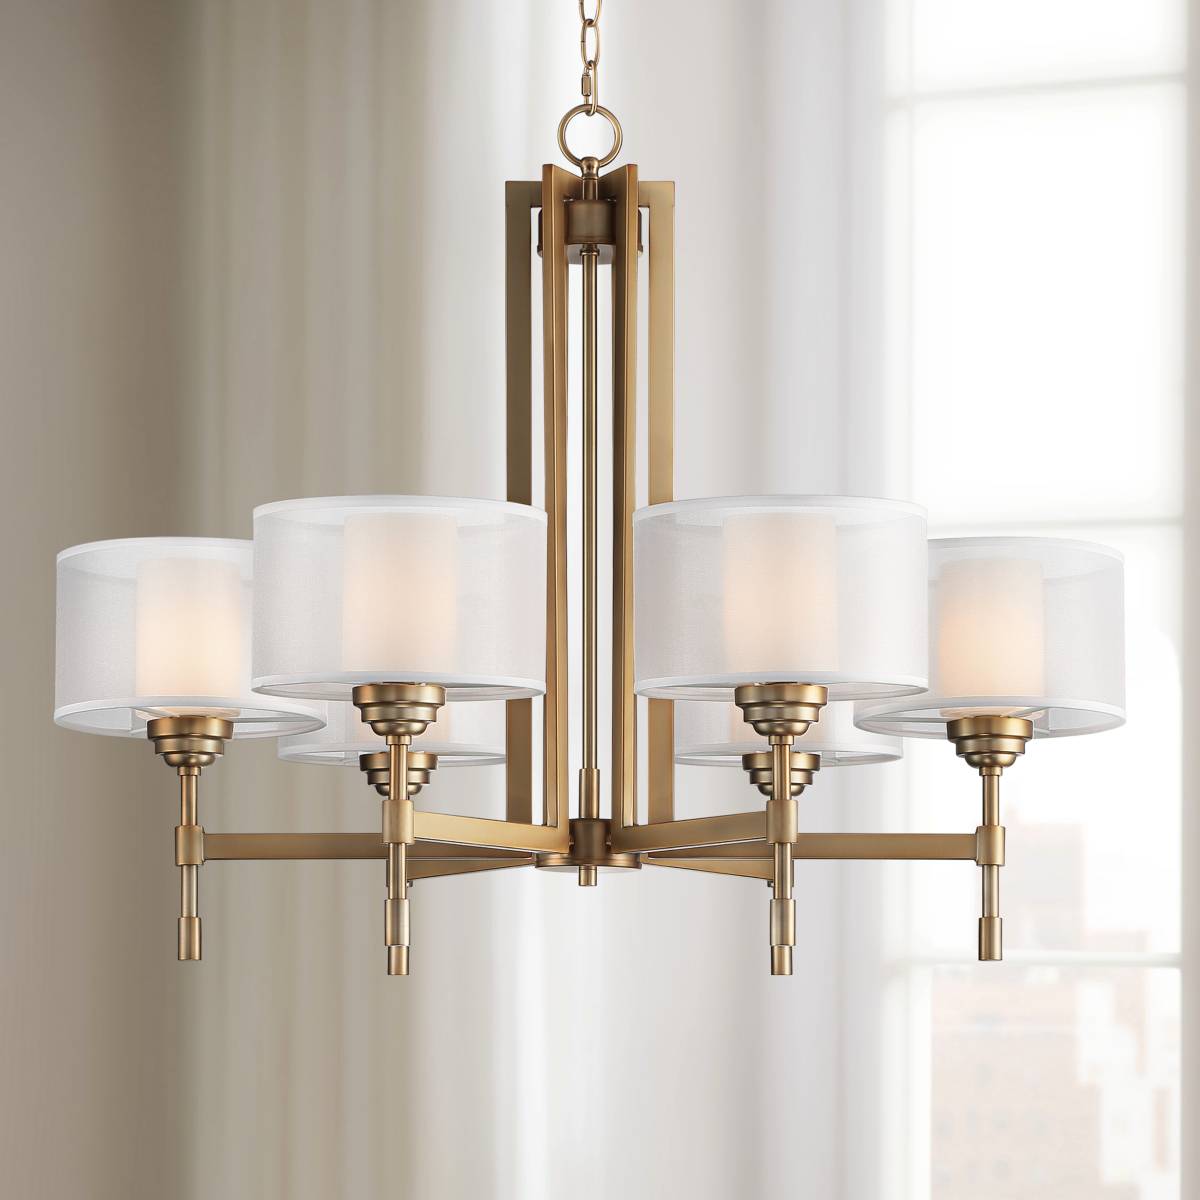 Large: 31 In. Wide And Up, Drum Chandeliers